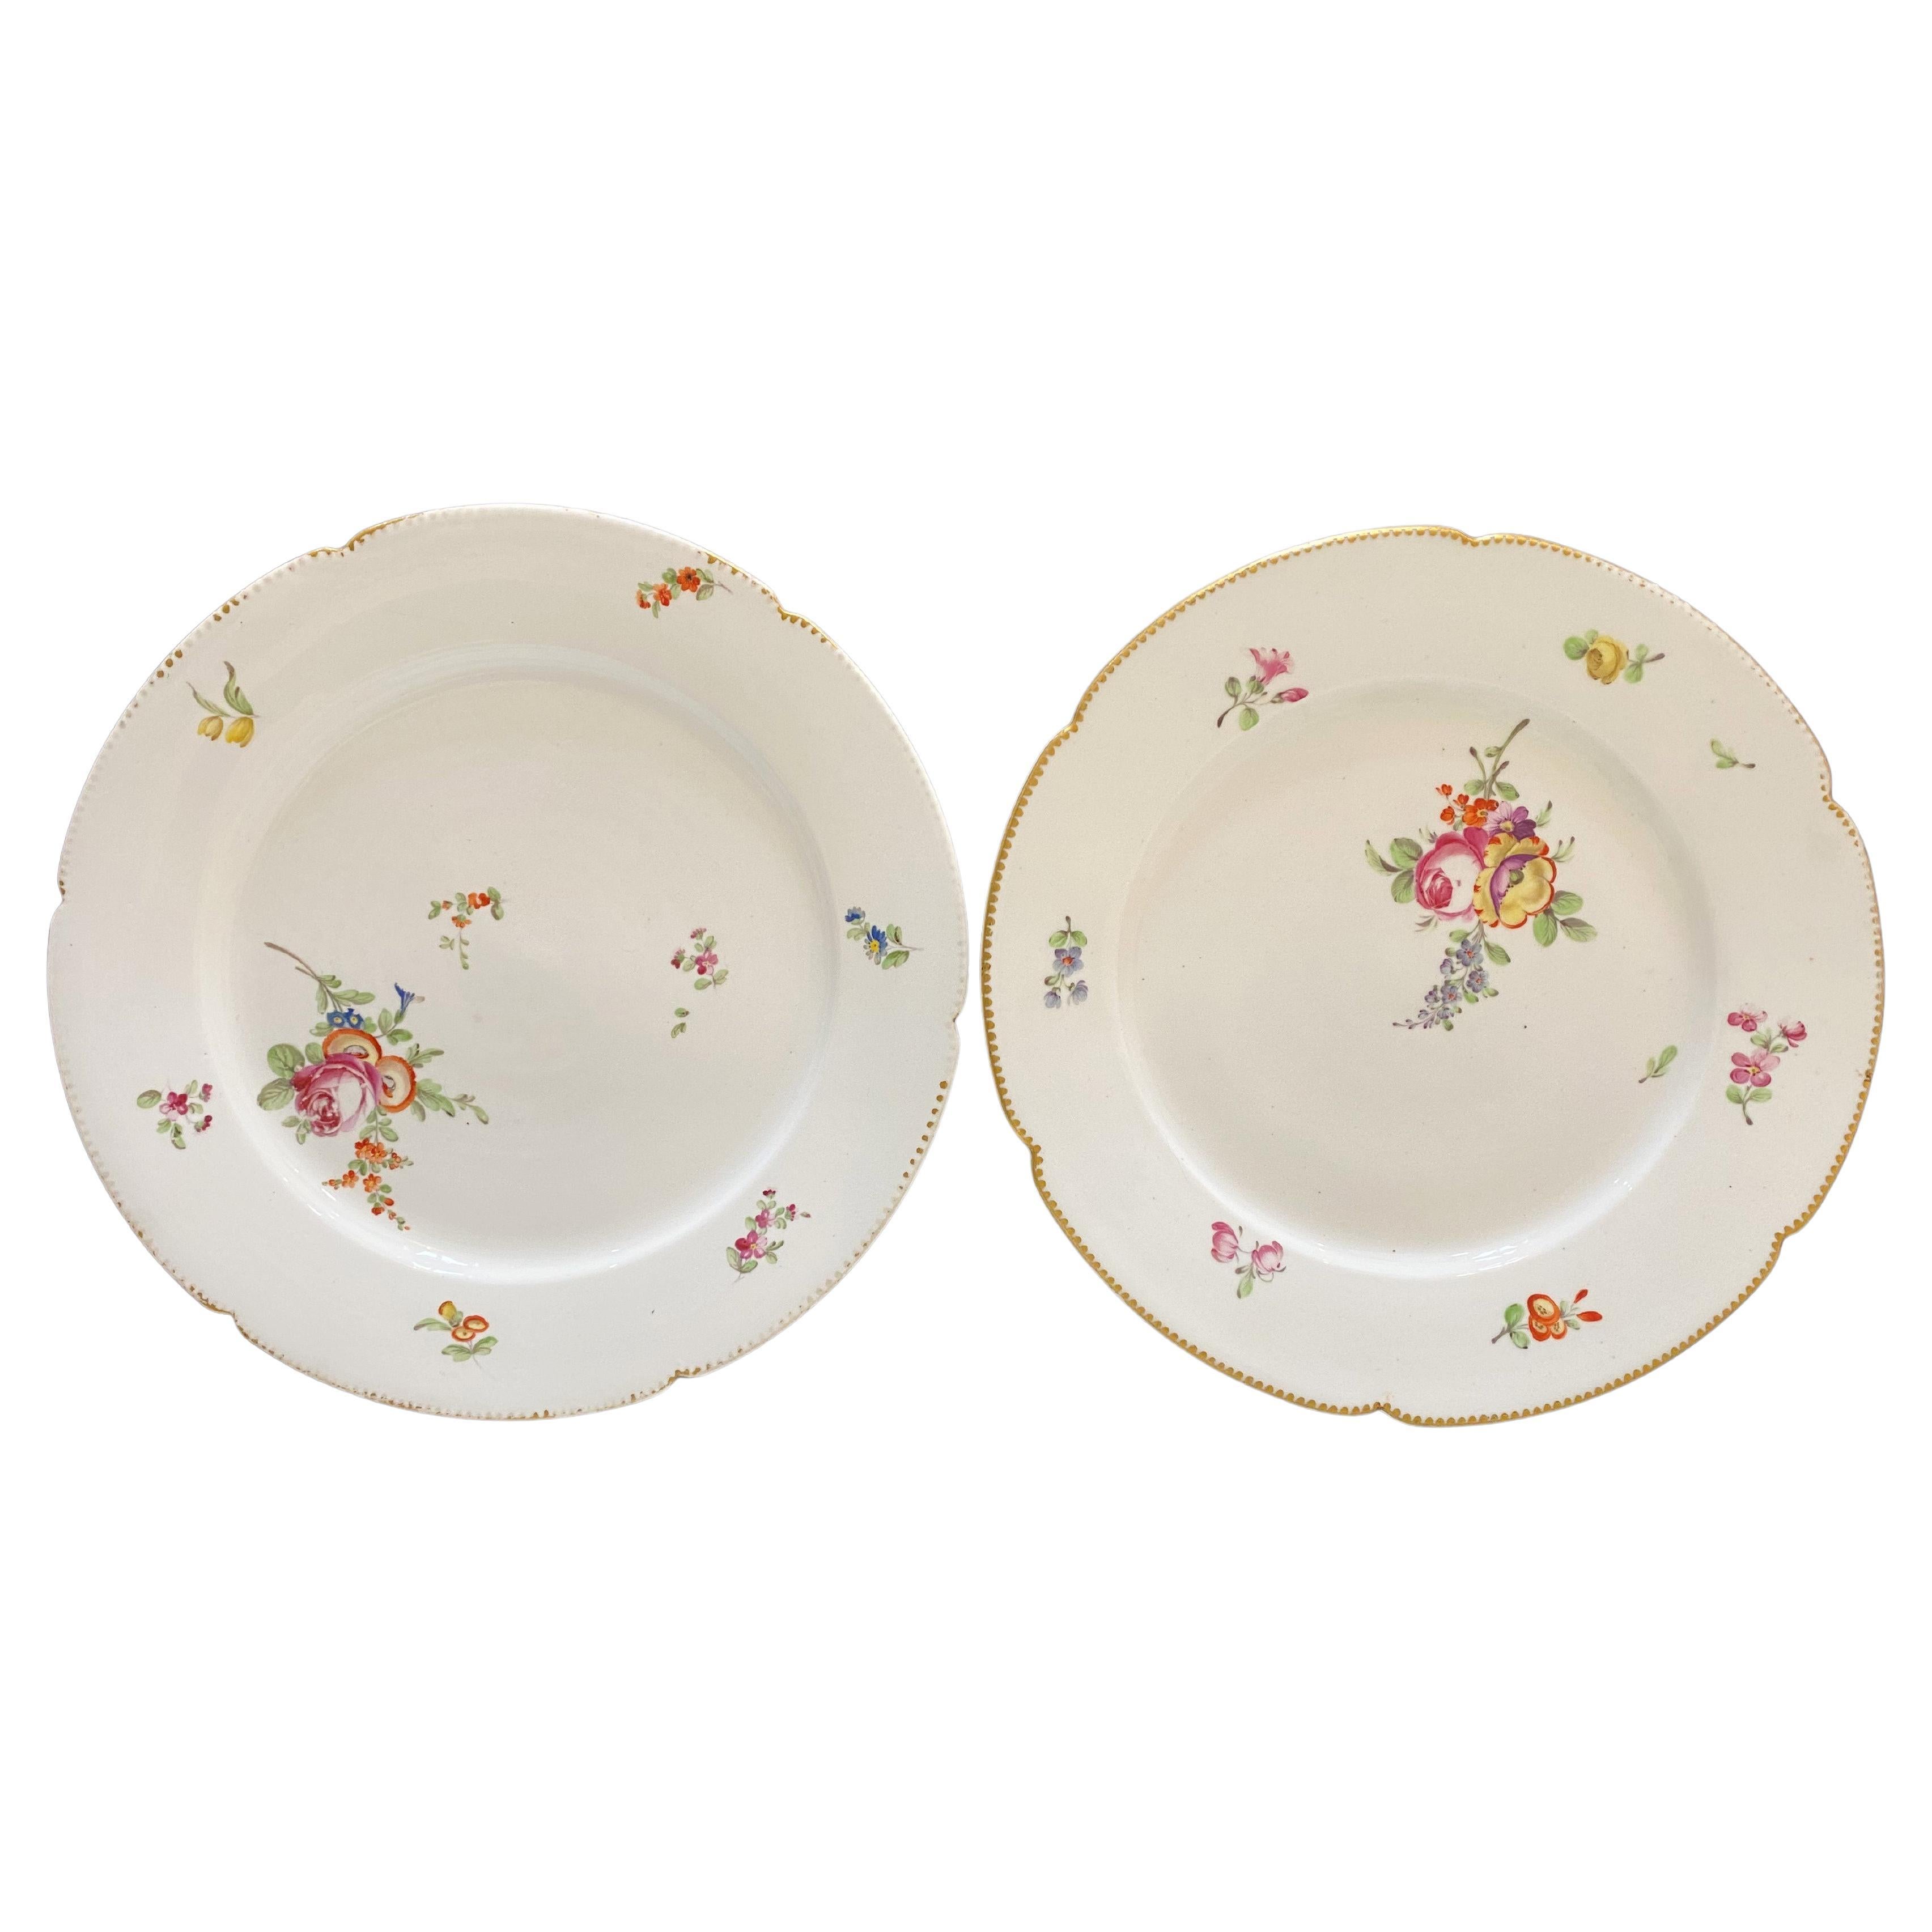 Pair of Chinese Plate India Compagny 18th Century